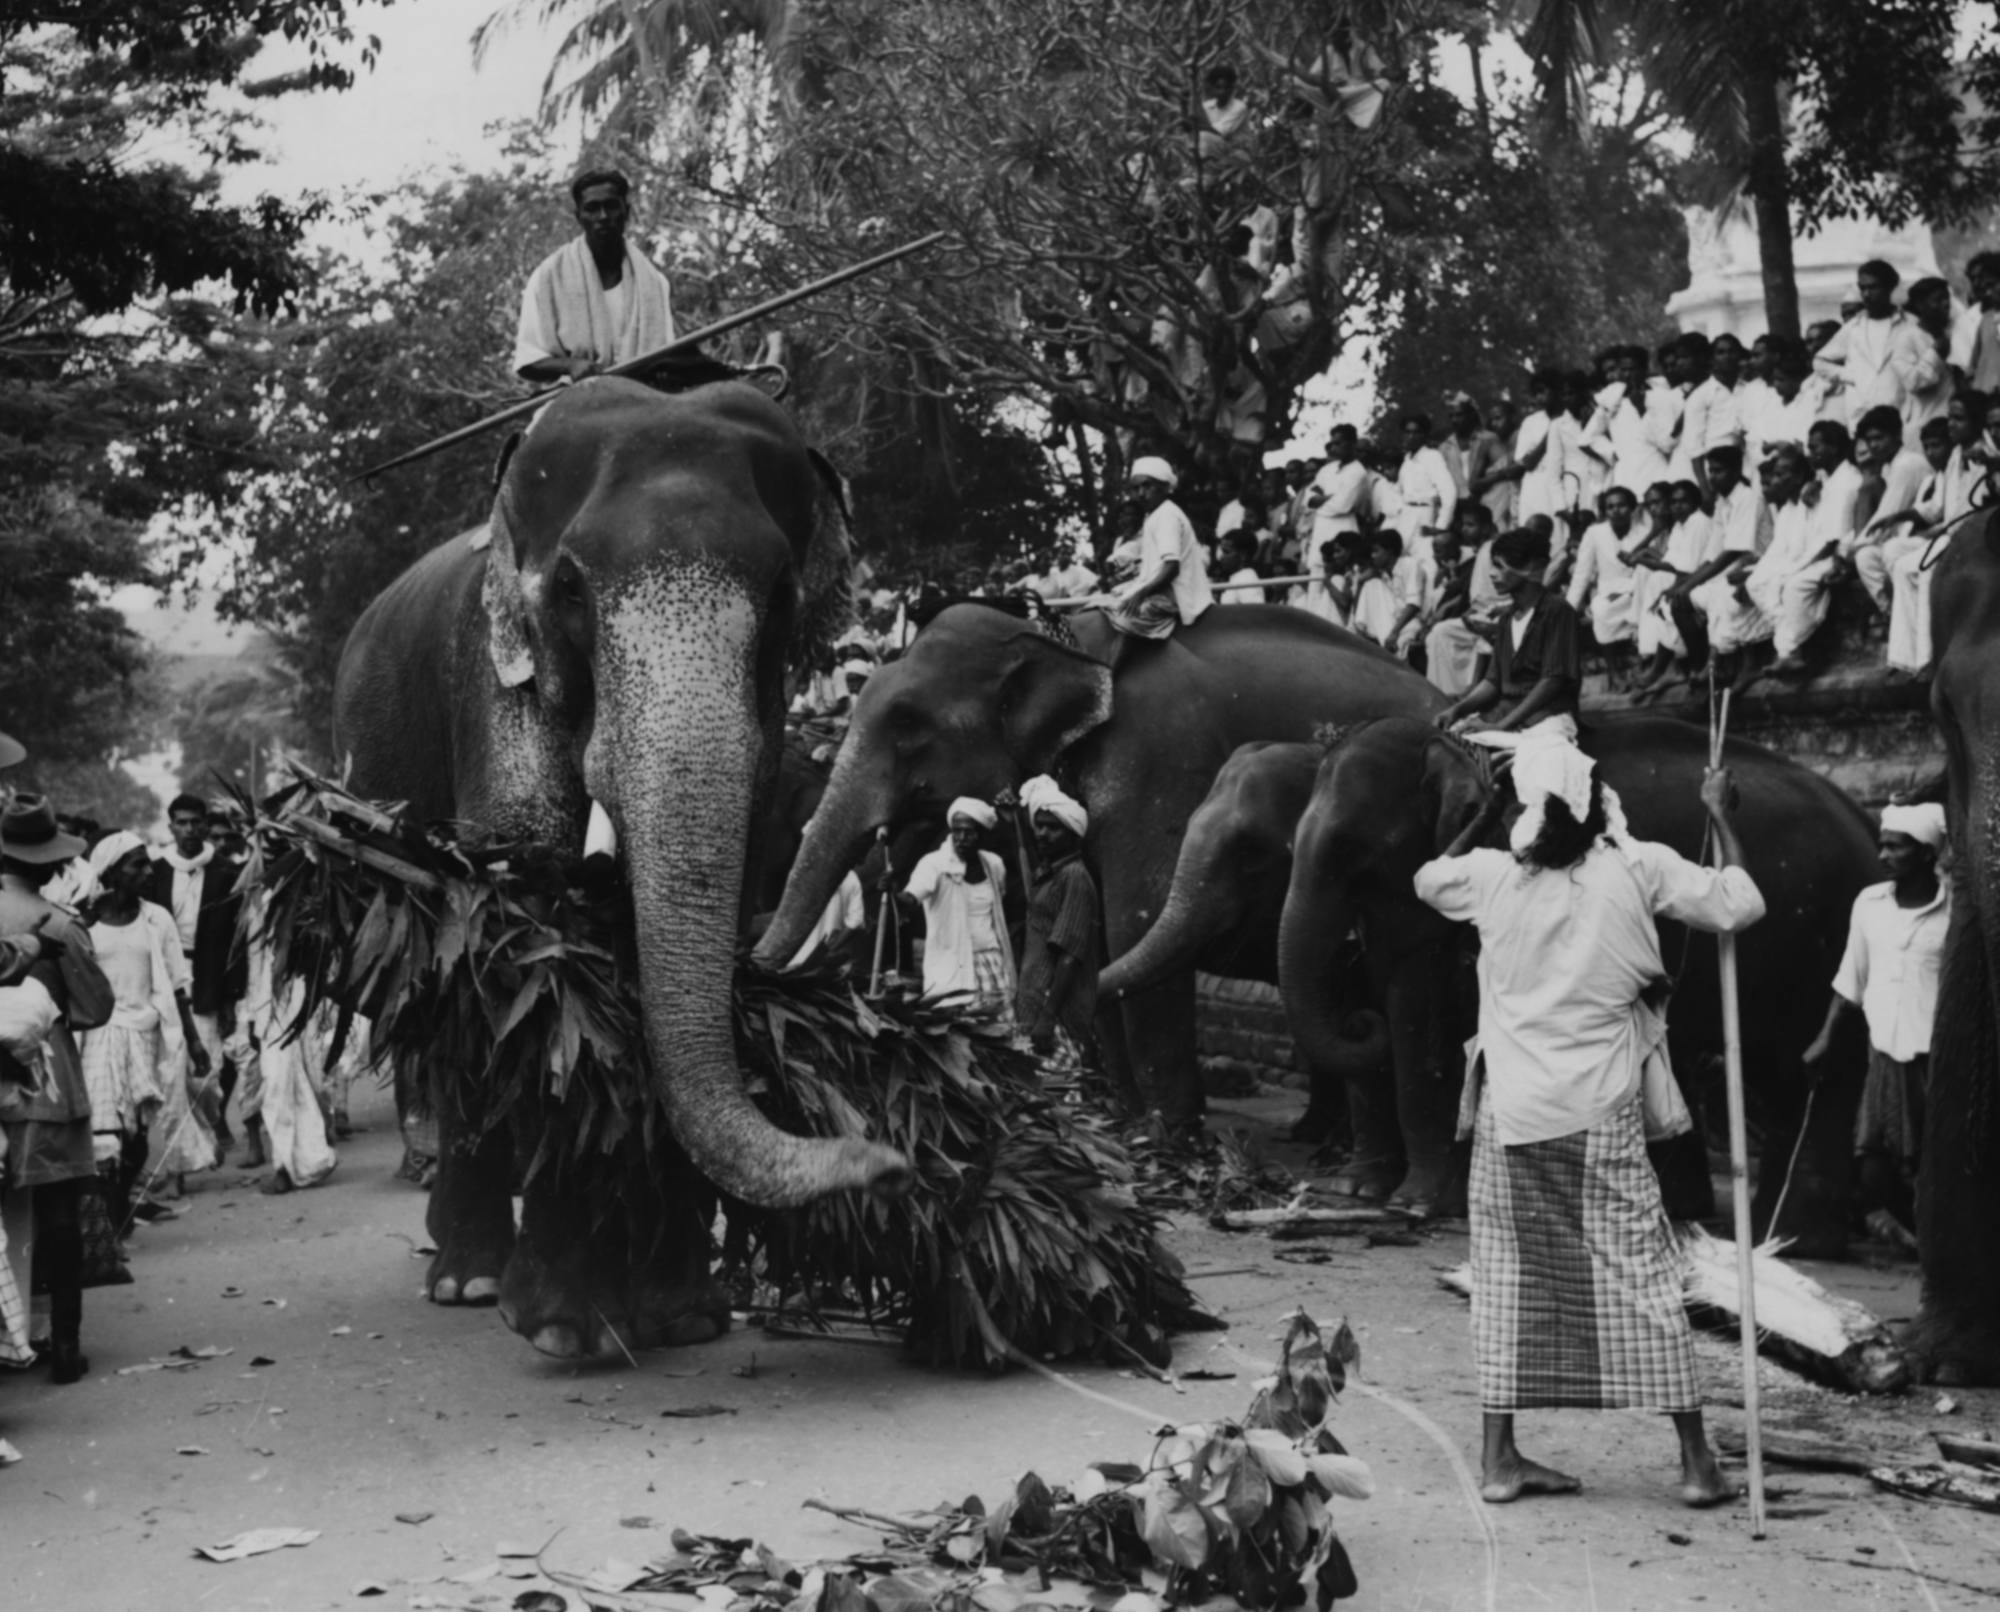 Elephants and their trainers arrive for a Raja Perahera ceremony to welcome Queen Elizabeth II on her Royal Tour in Ceylon